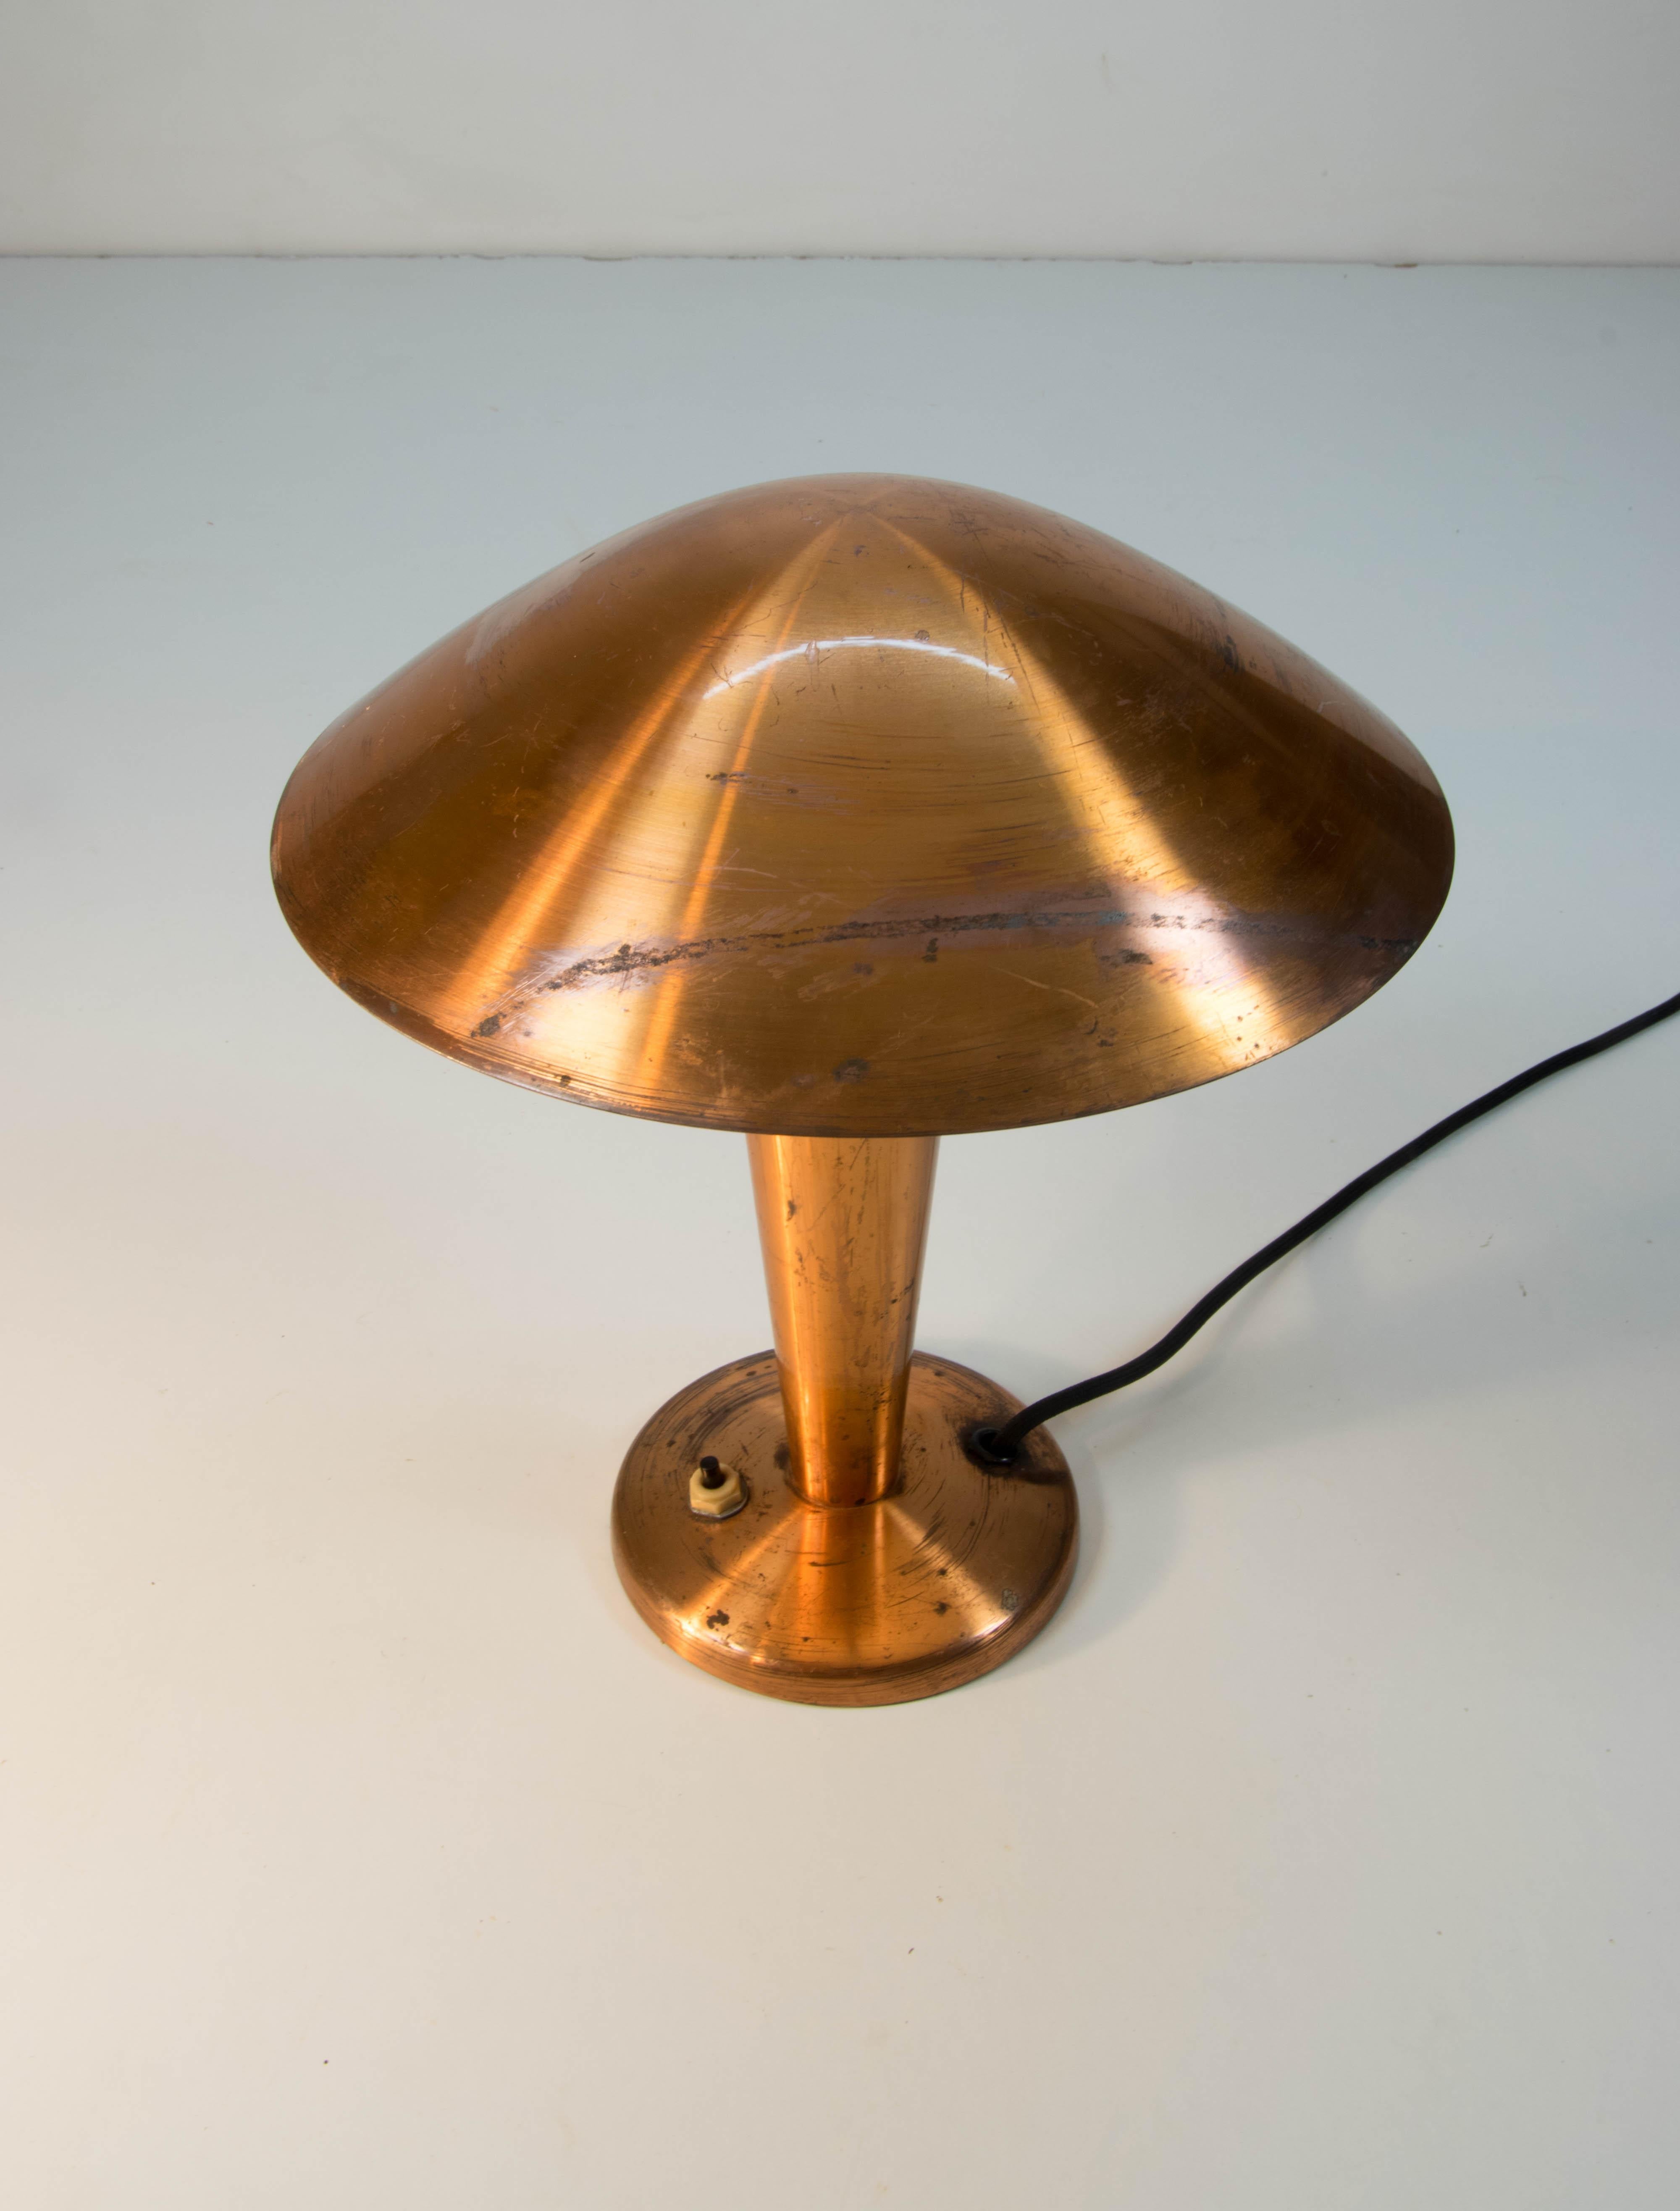 - 1930s, Czechoslovakia
- Lacquered copper-plated metal with patina
- Max 60W, E27 or E26 bulb.
- Rewired.